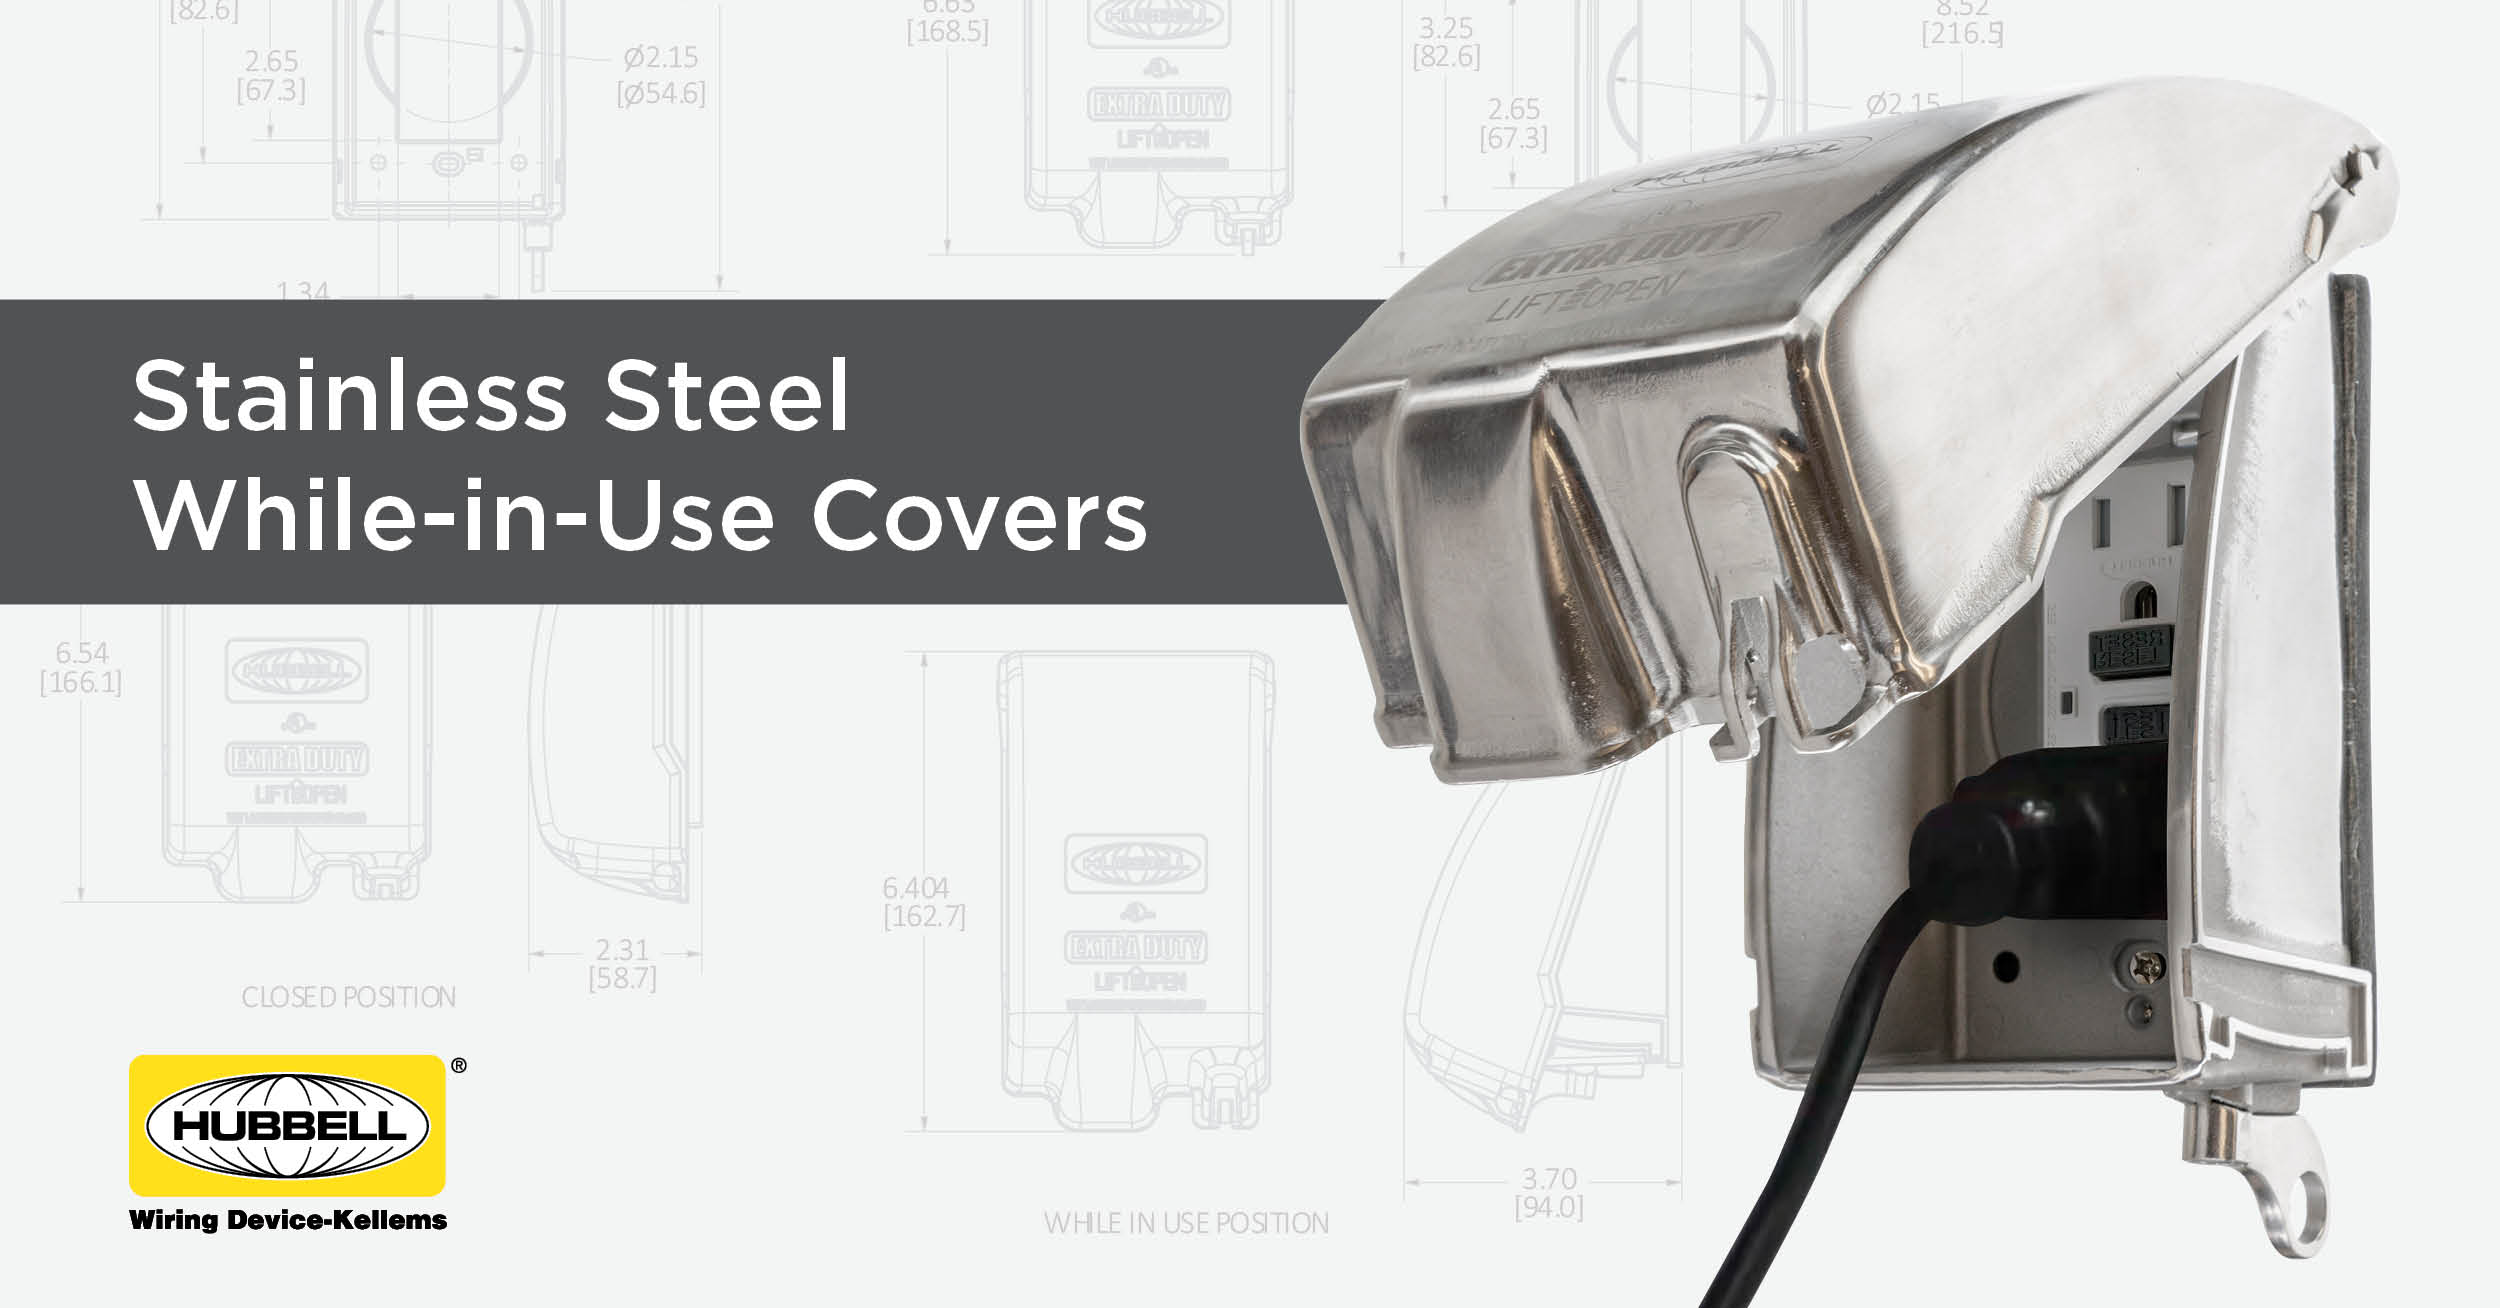 Protection for Any Type of Receptacle with Hubbell’s Stainless Steel While In Use Covers